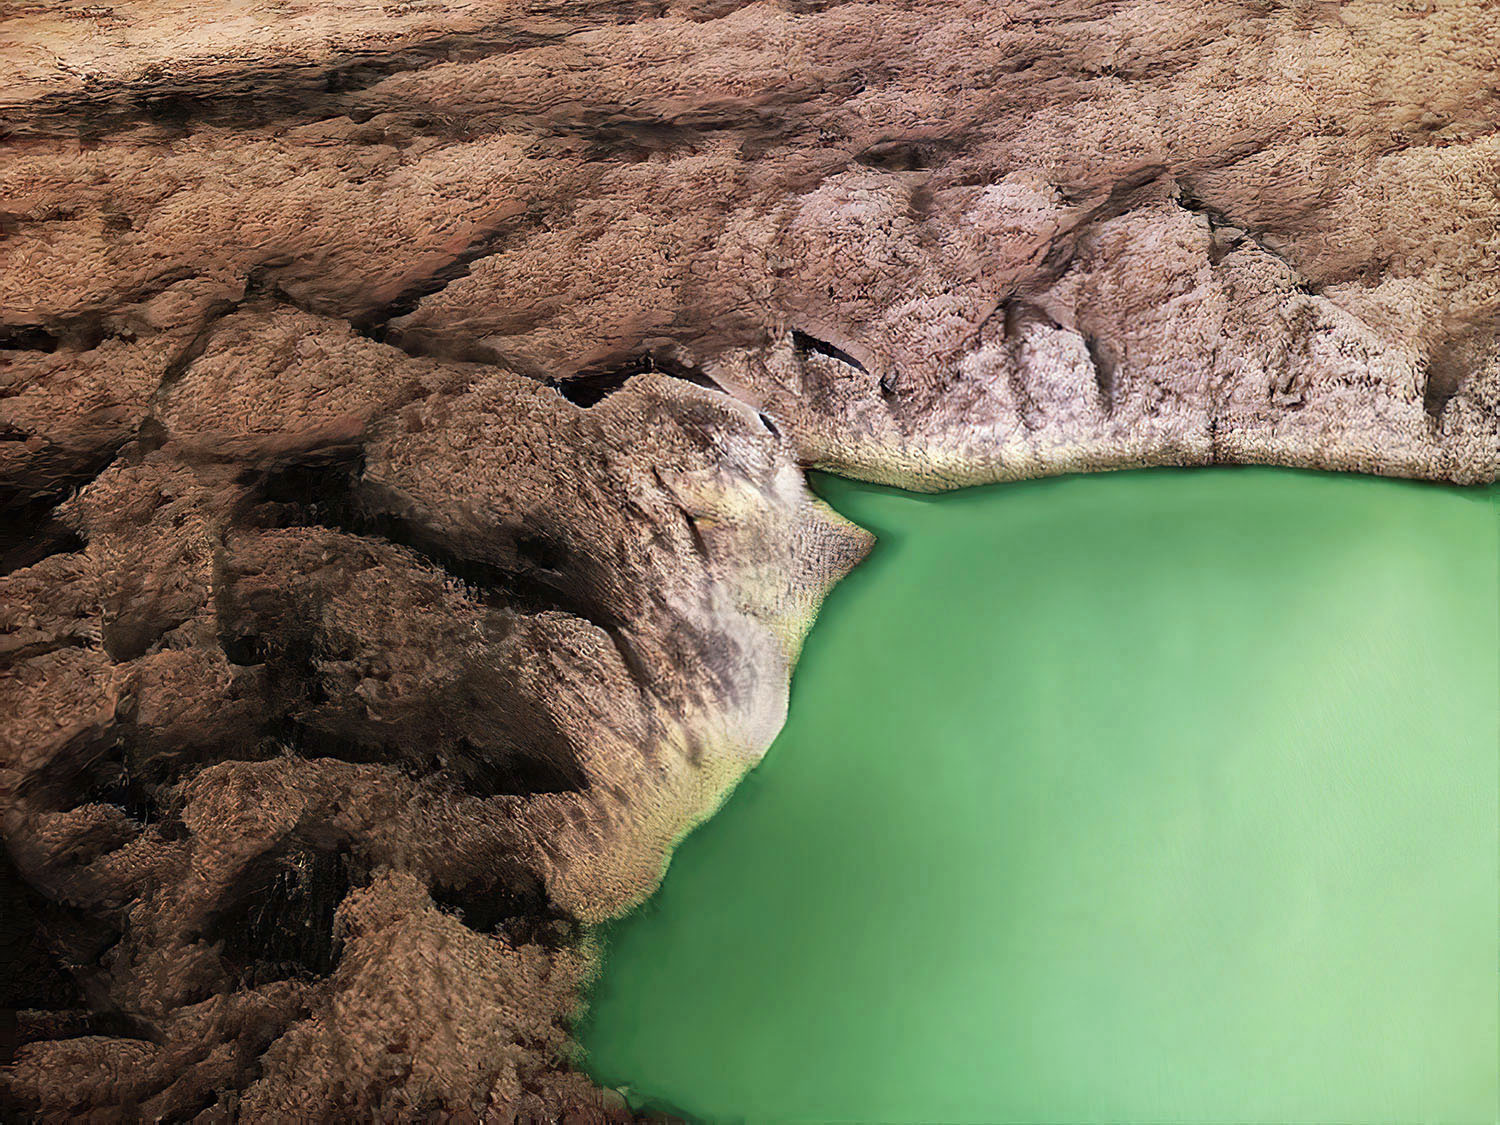 A computer generated image of a green pool of water surrounded by rocks.